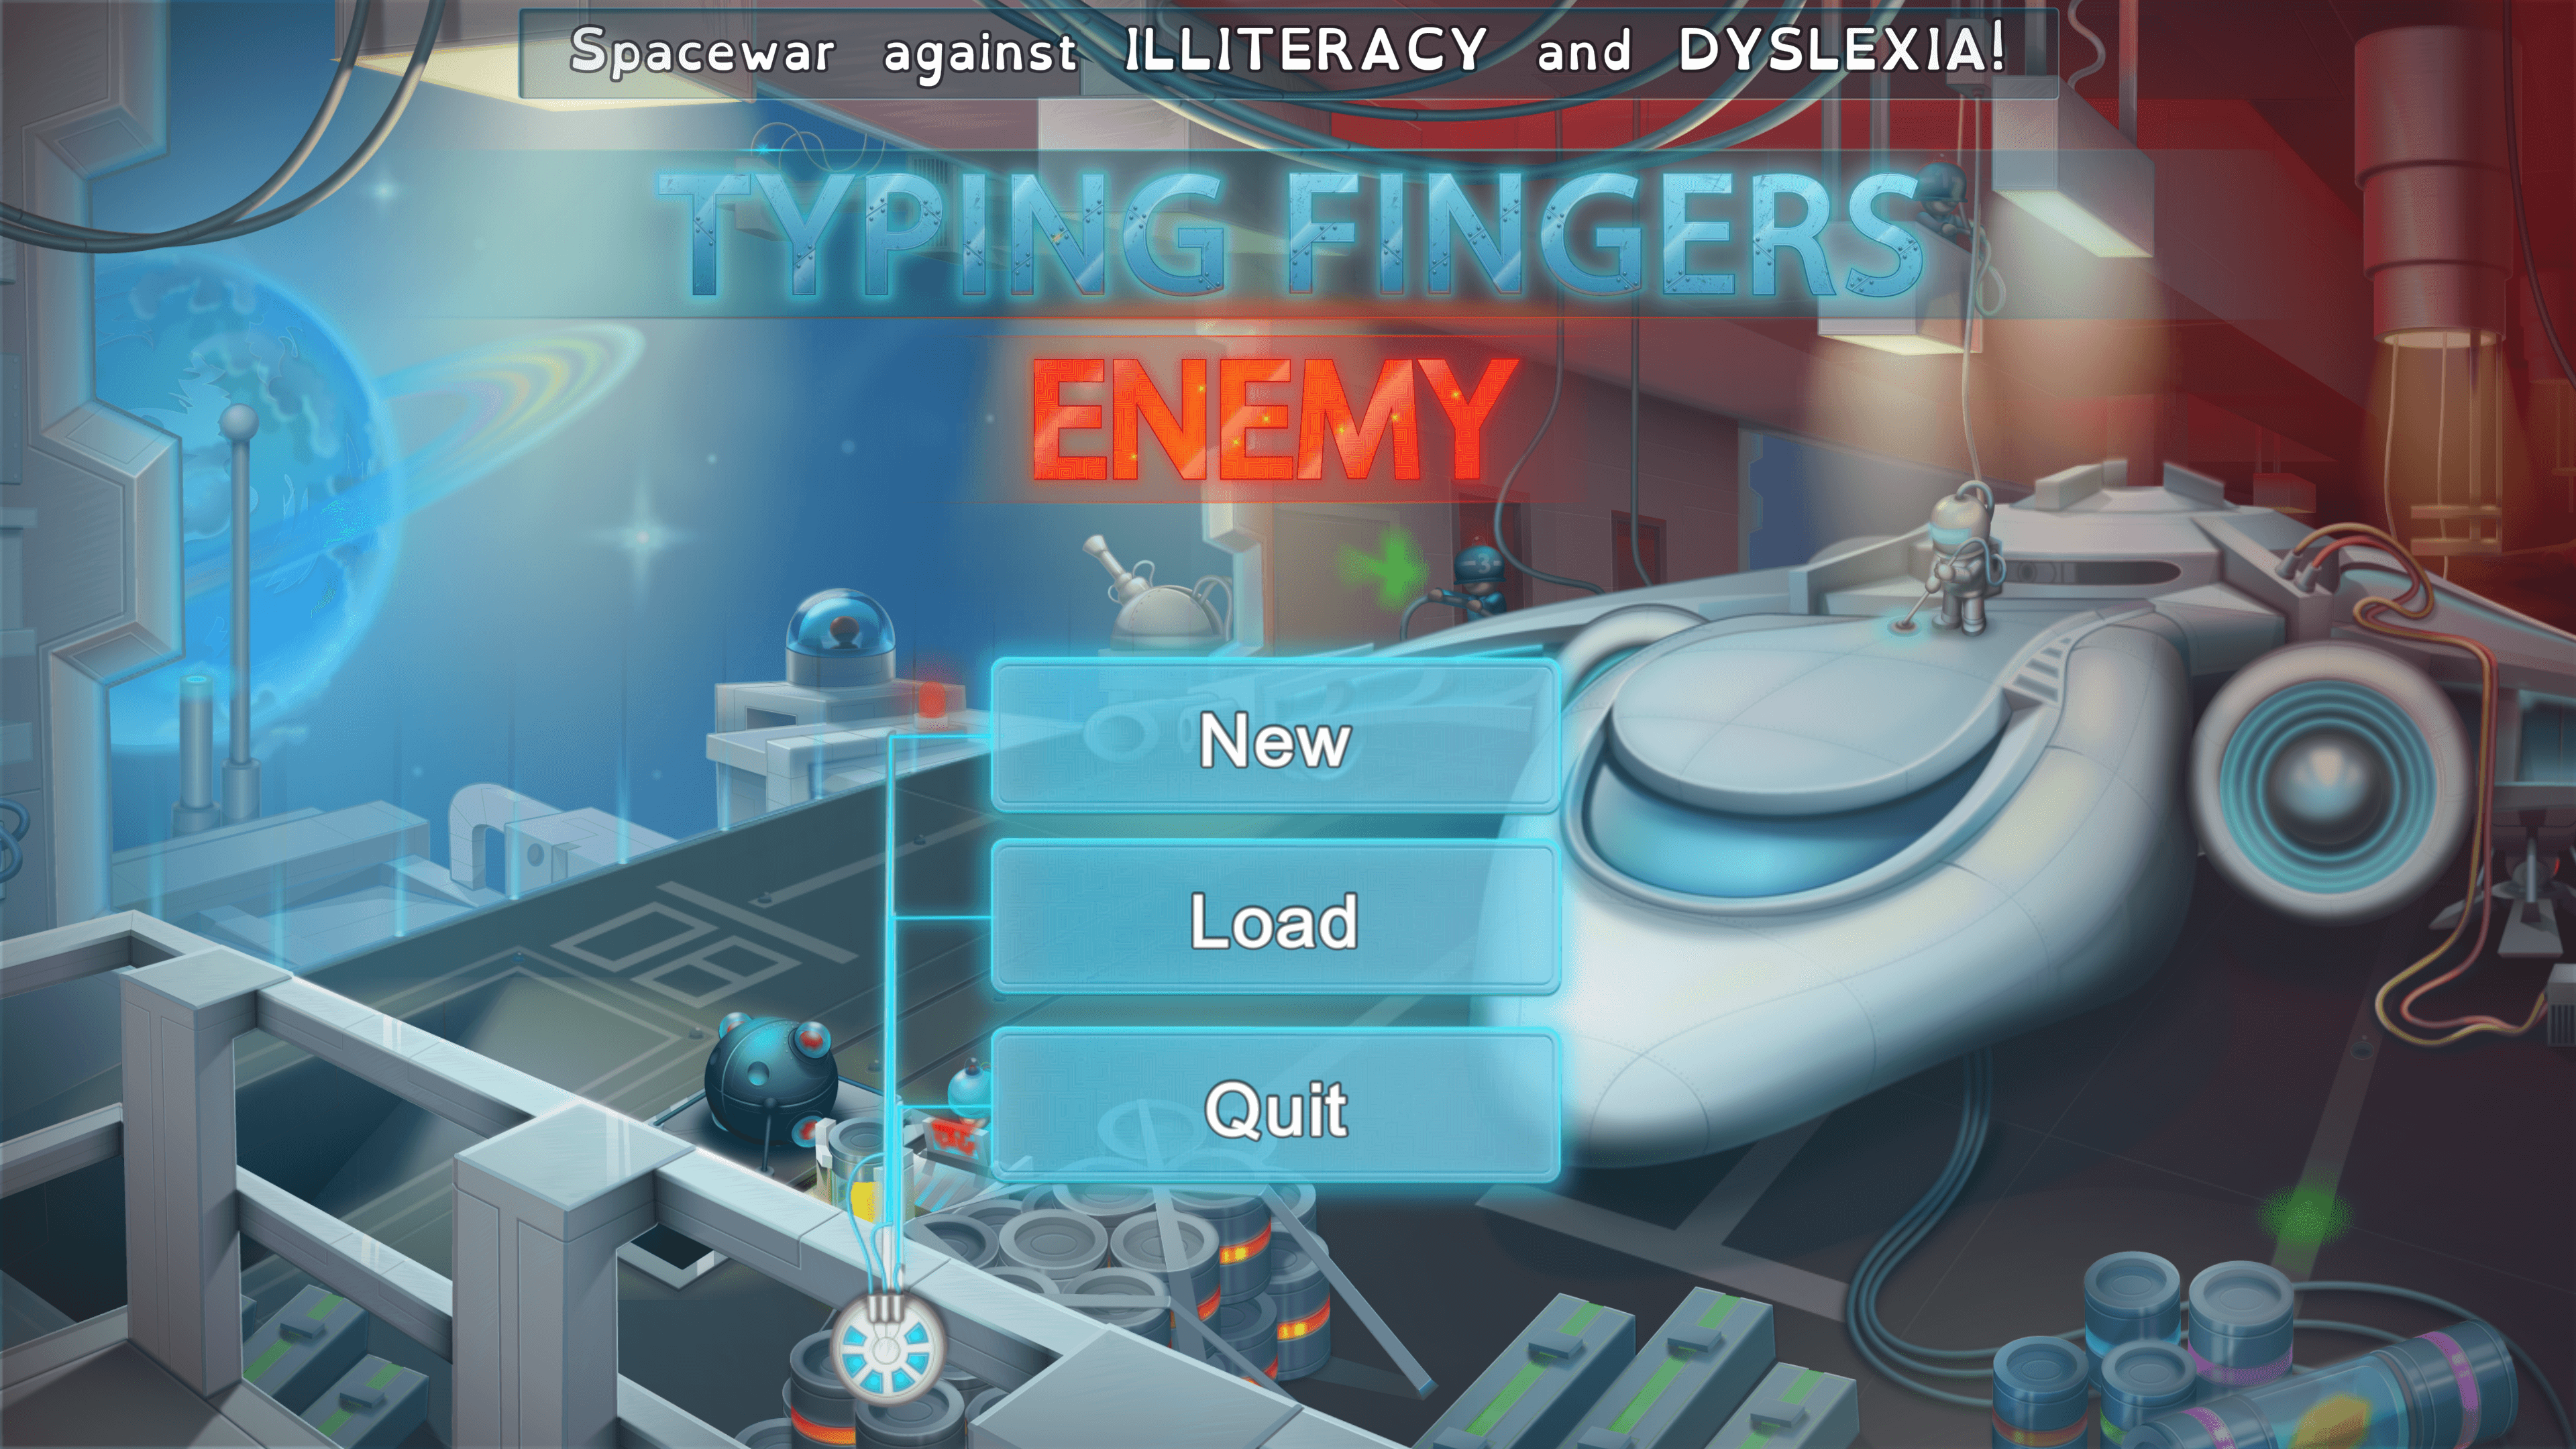 Welcome to Typing Fingers Enemy